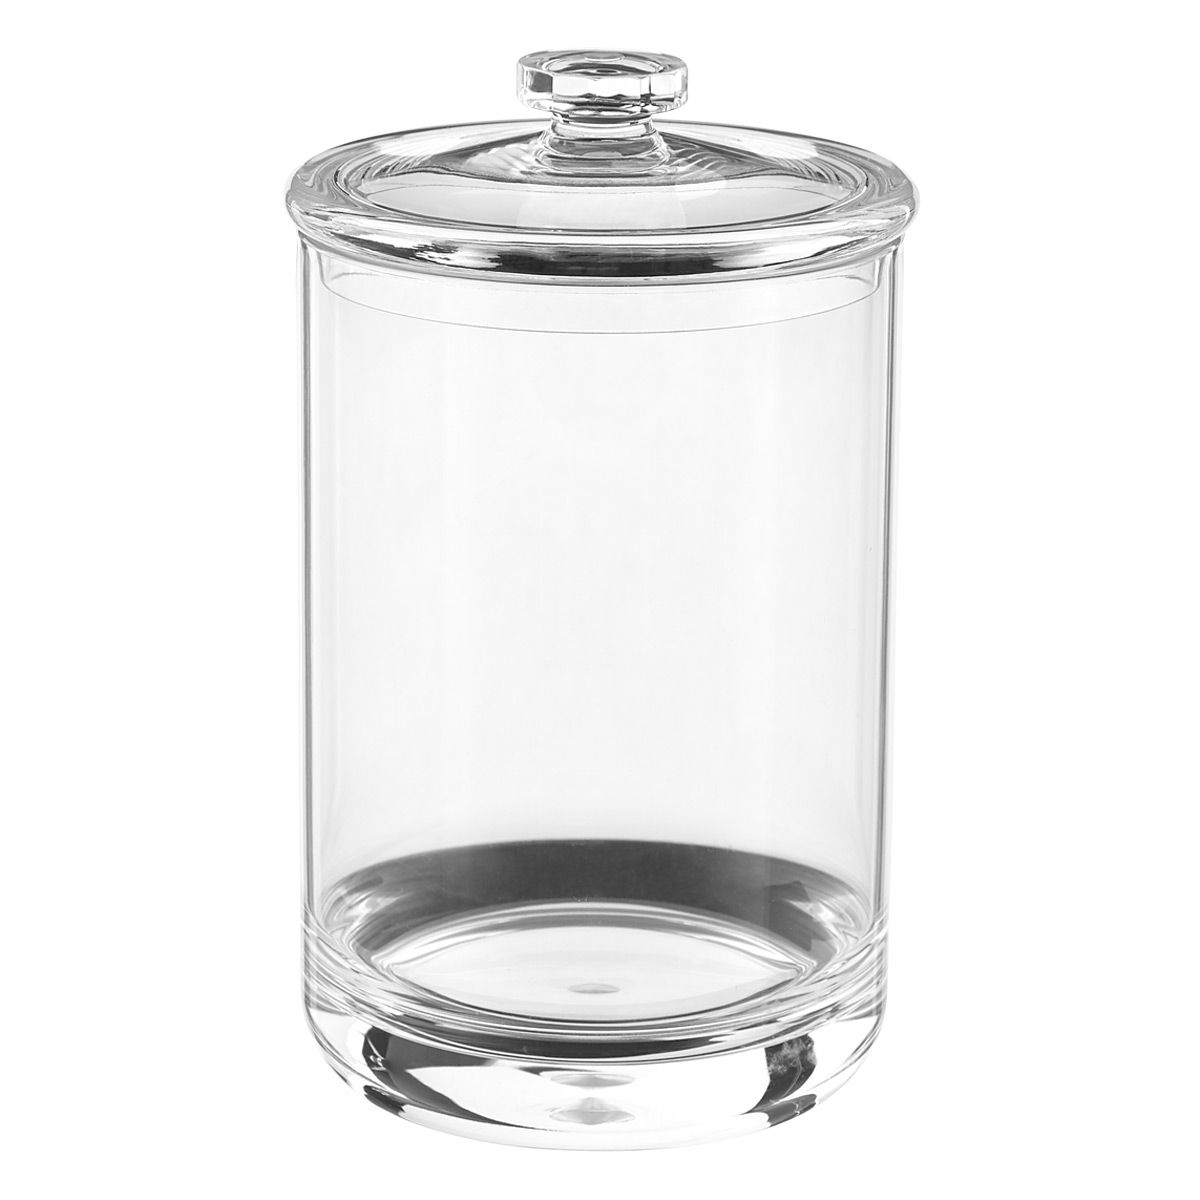 Bliss Acrylic Canisters | The Container Store